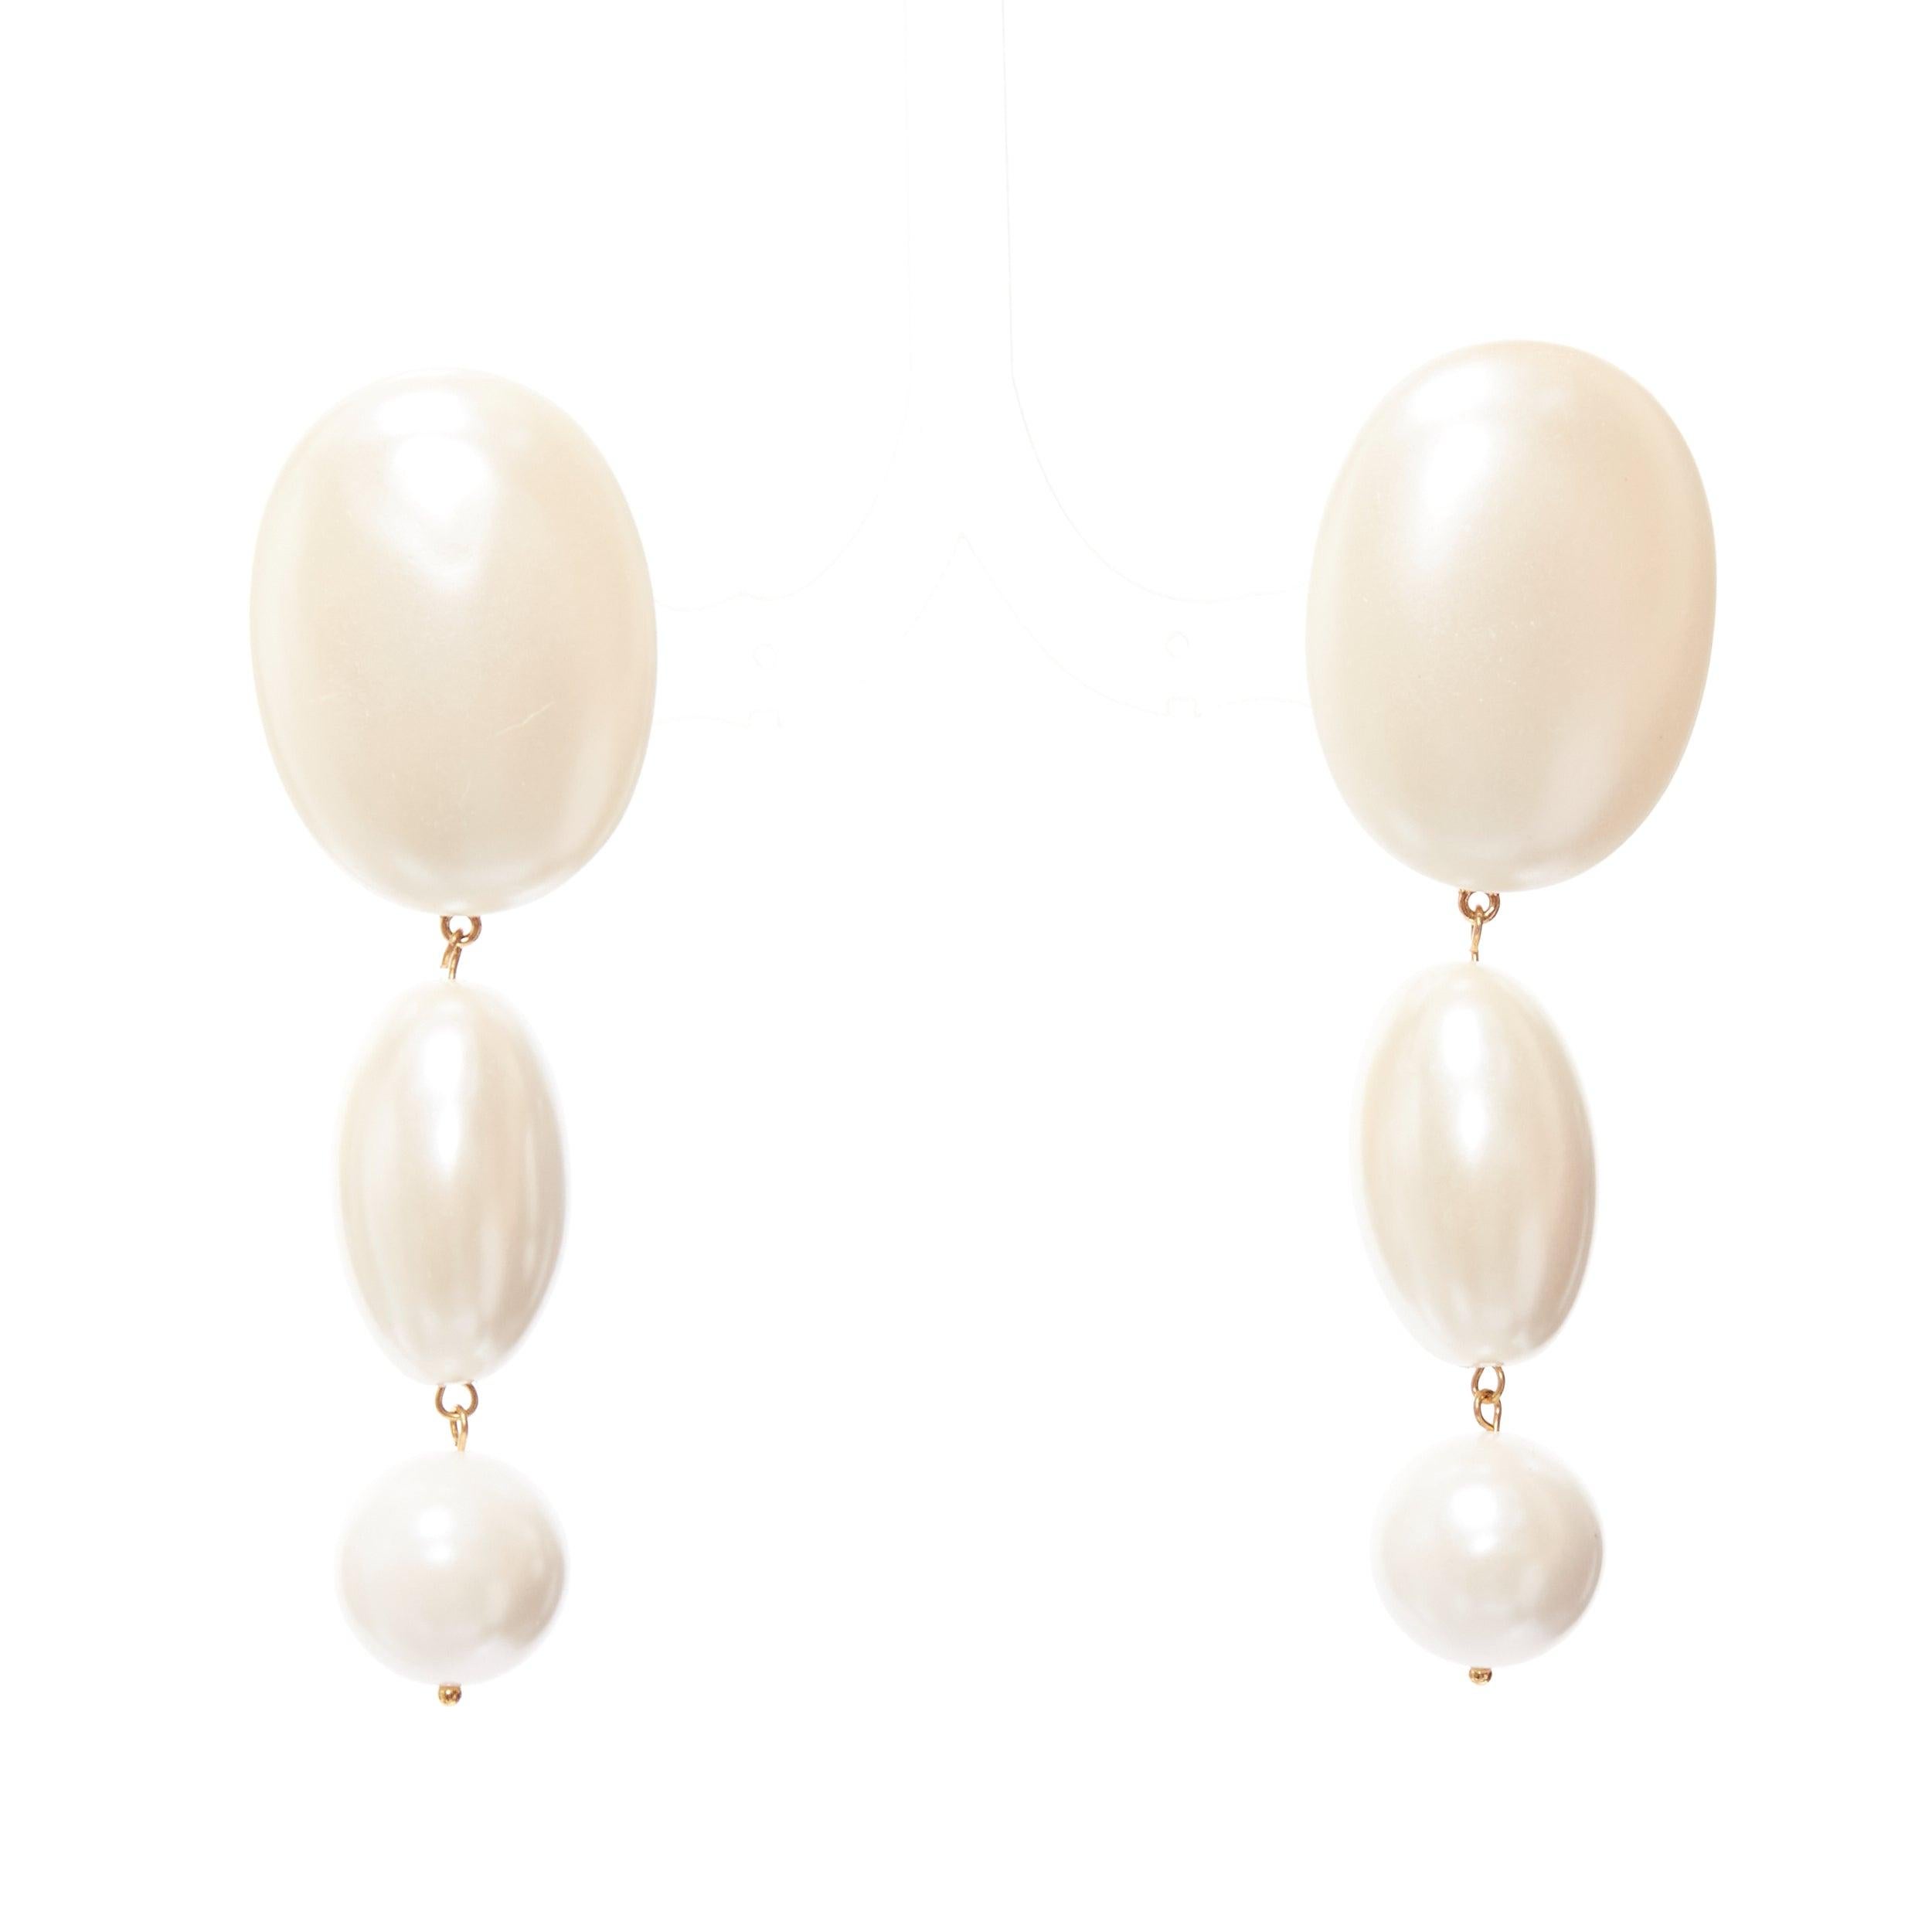 LELE SADOUGHI cream big geometric faux pearls drop pin earrings
Reference: AAWC/A01231
Brand: Lele Sadoughi
Material: Faux Pearl
Color: Cream, Gold
Pattern: Solid
Closure: Pin
Lining: Gold Metal

CONDITION:
Condition: Fair, this item was pre-owned